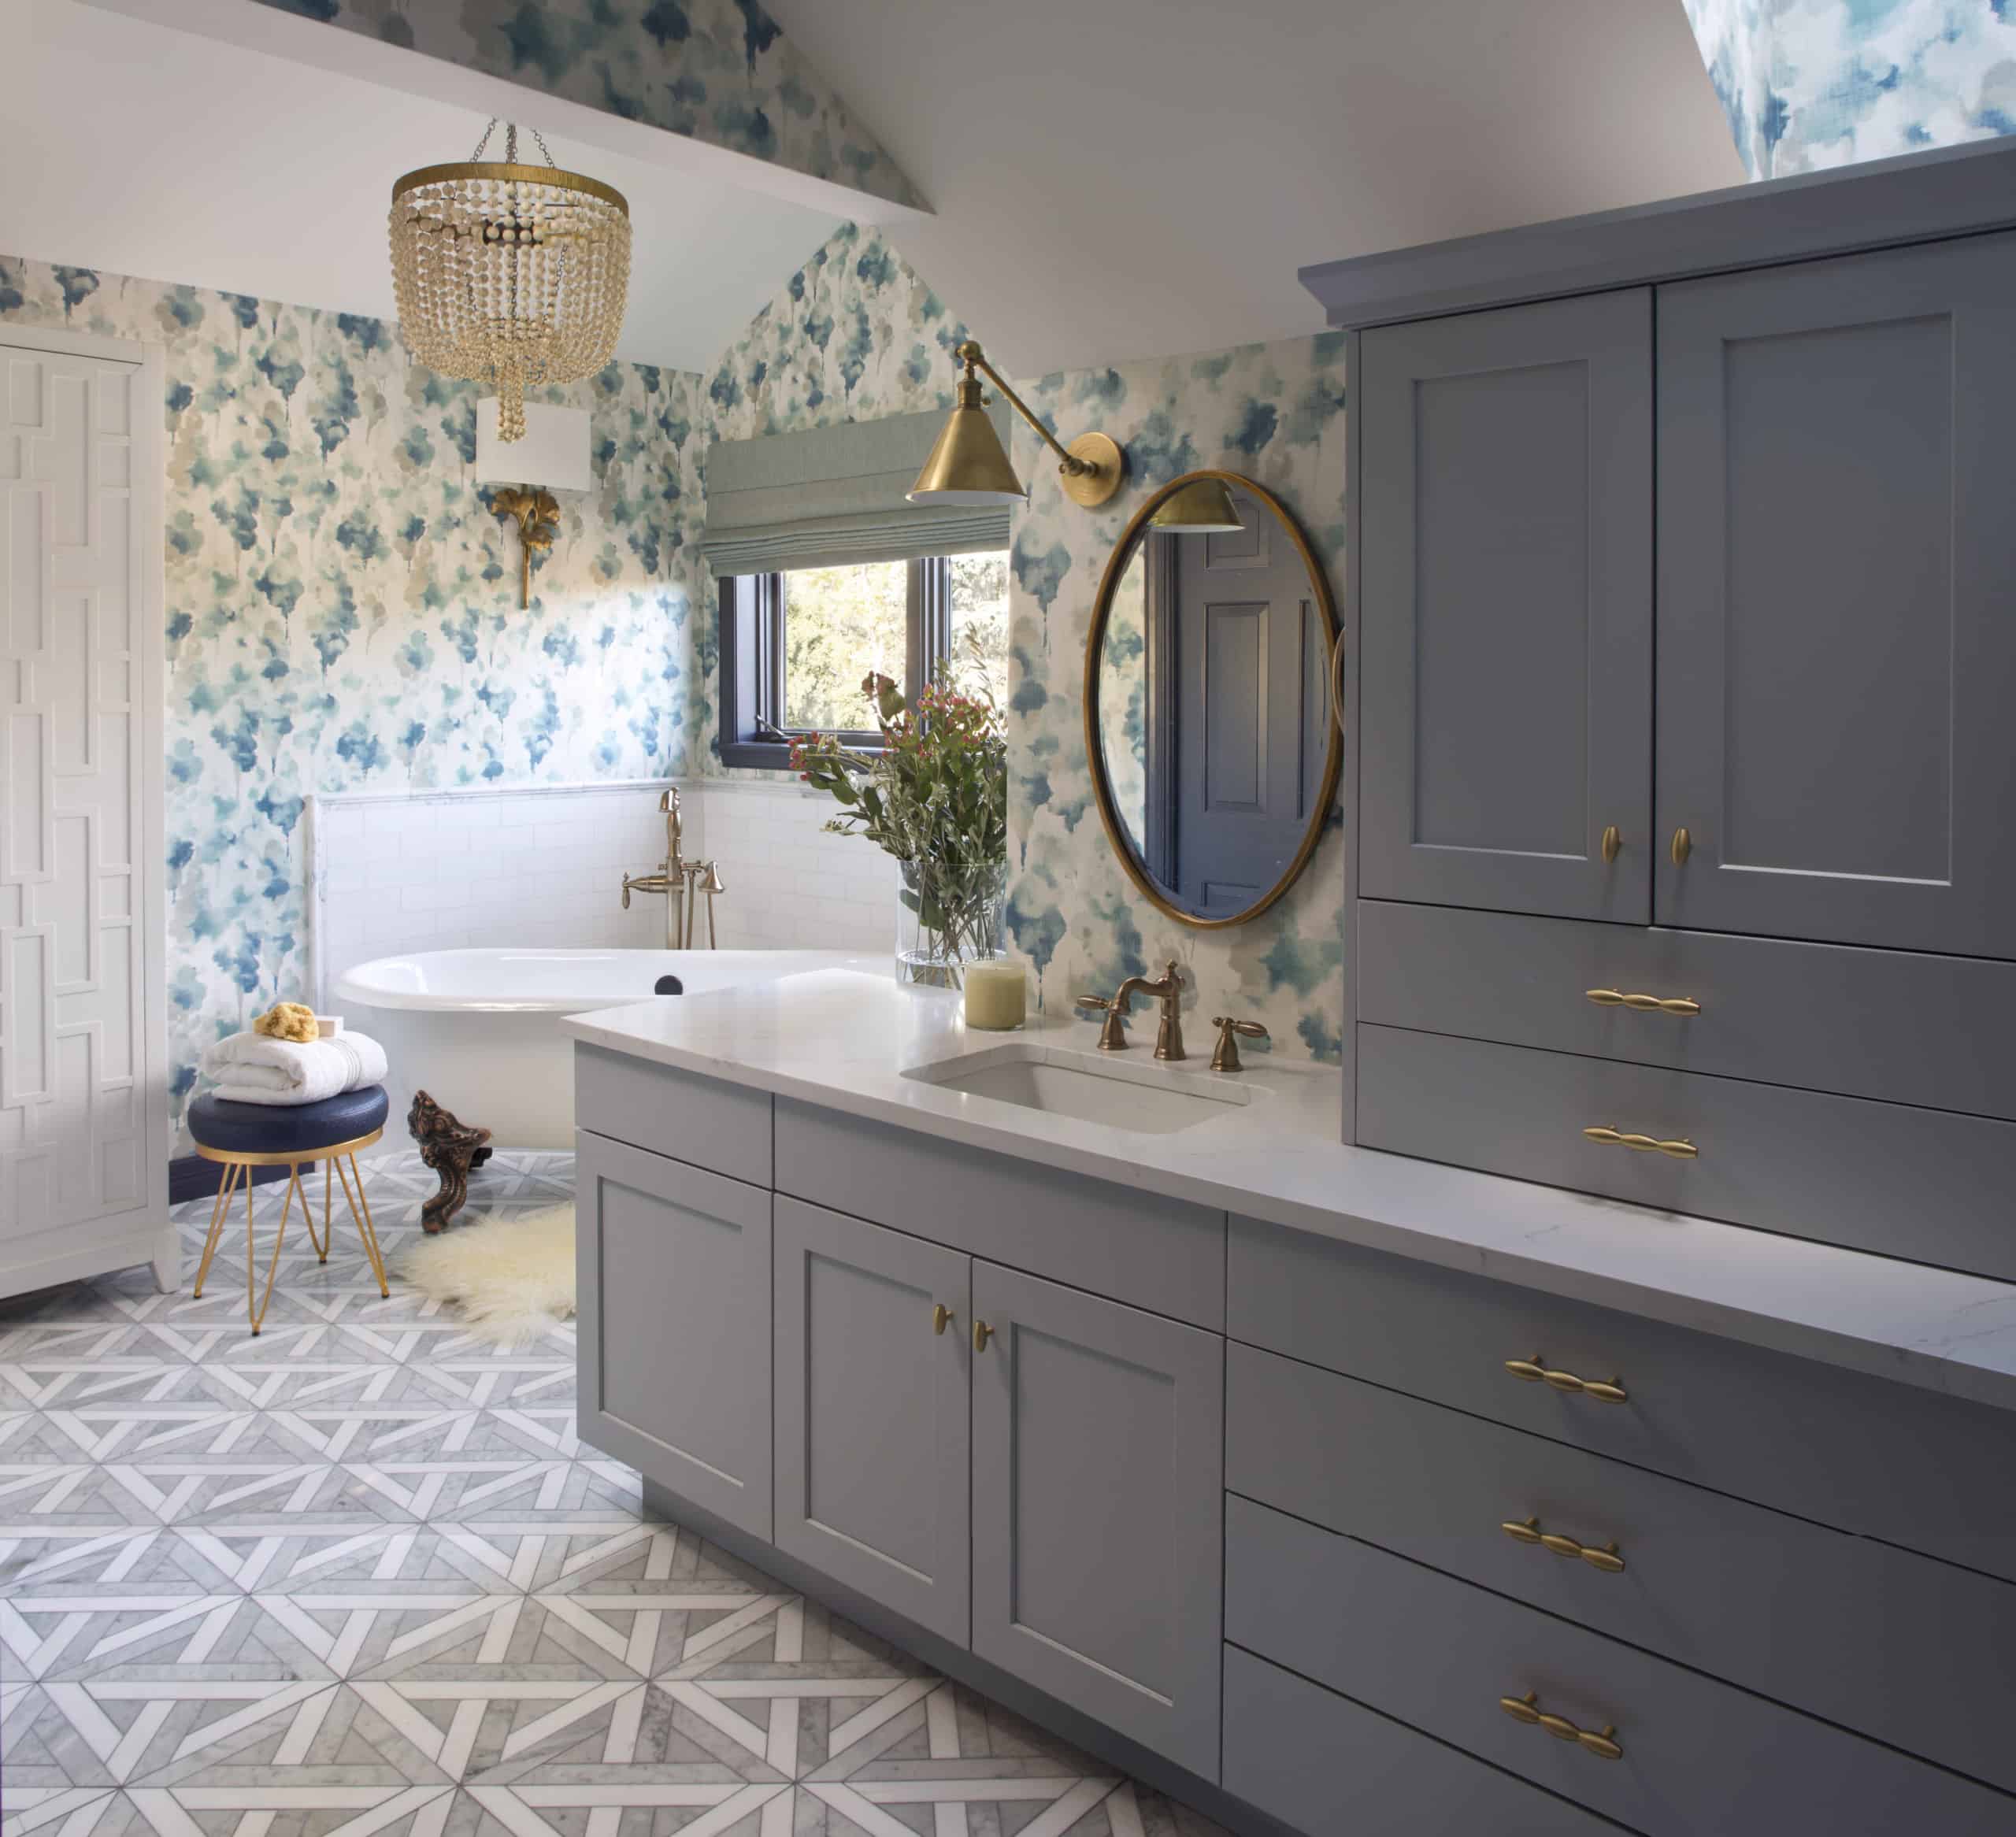 Spa-like master bath with sweet wallpaper and beaded chandelier